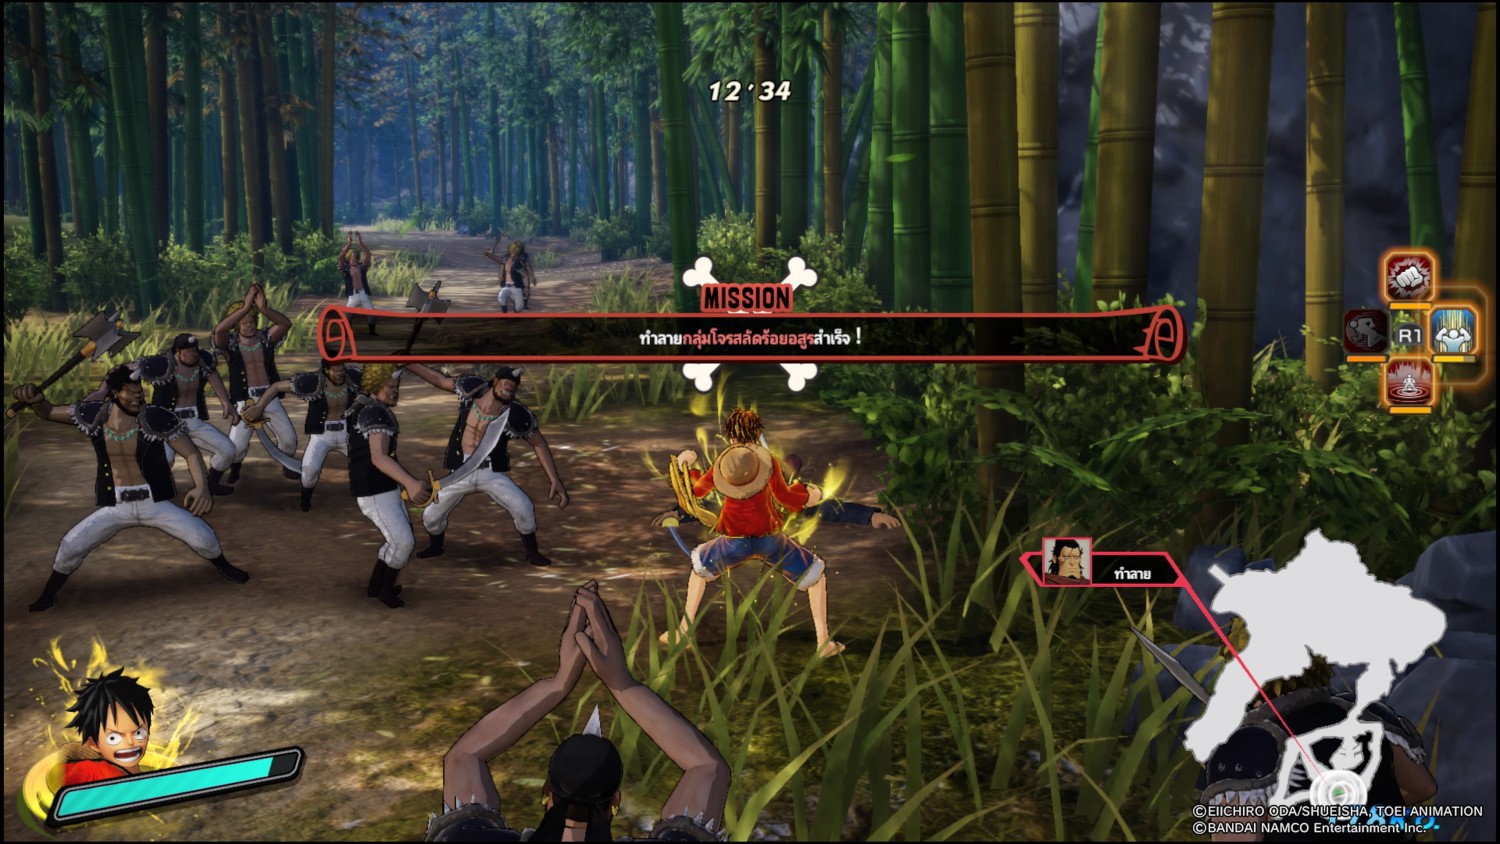 ps4 one piece pirate warriors 4